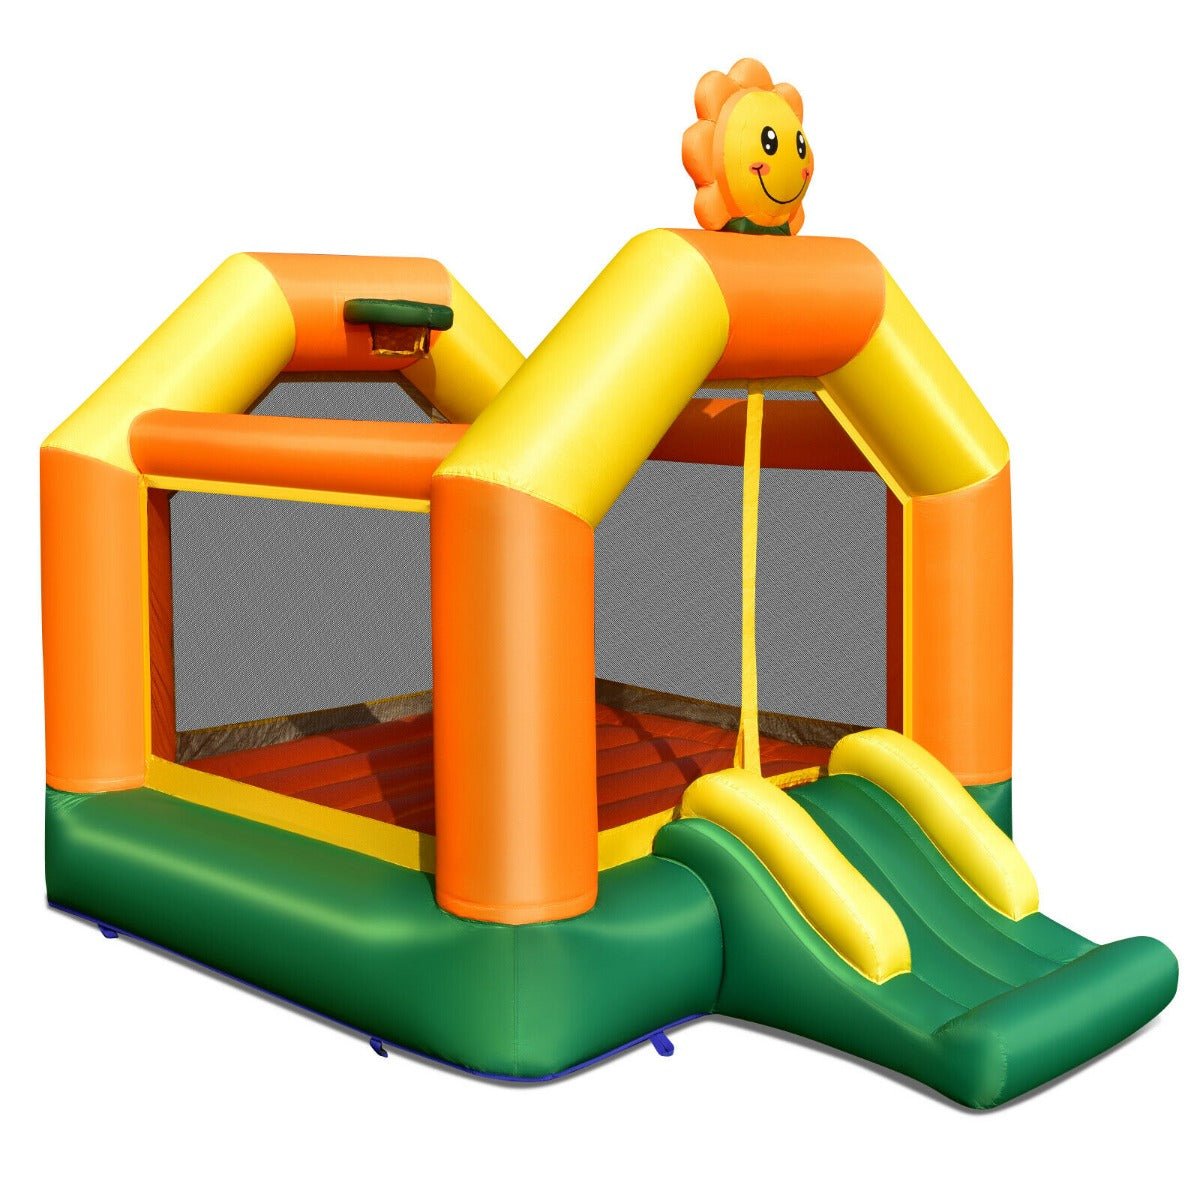 Inflatable Play Structure - Bounce House for Kids (Blower Not Included)